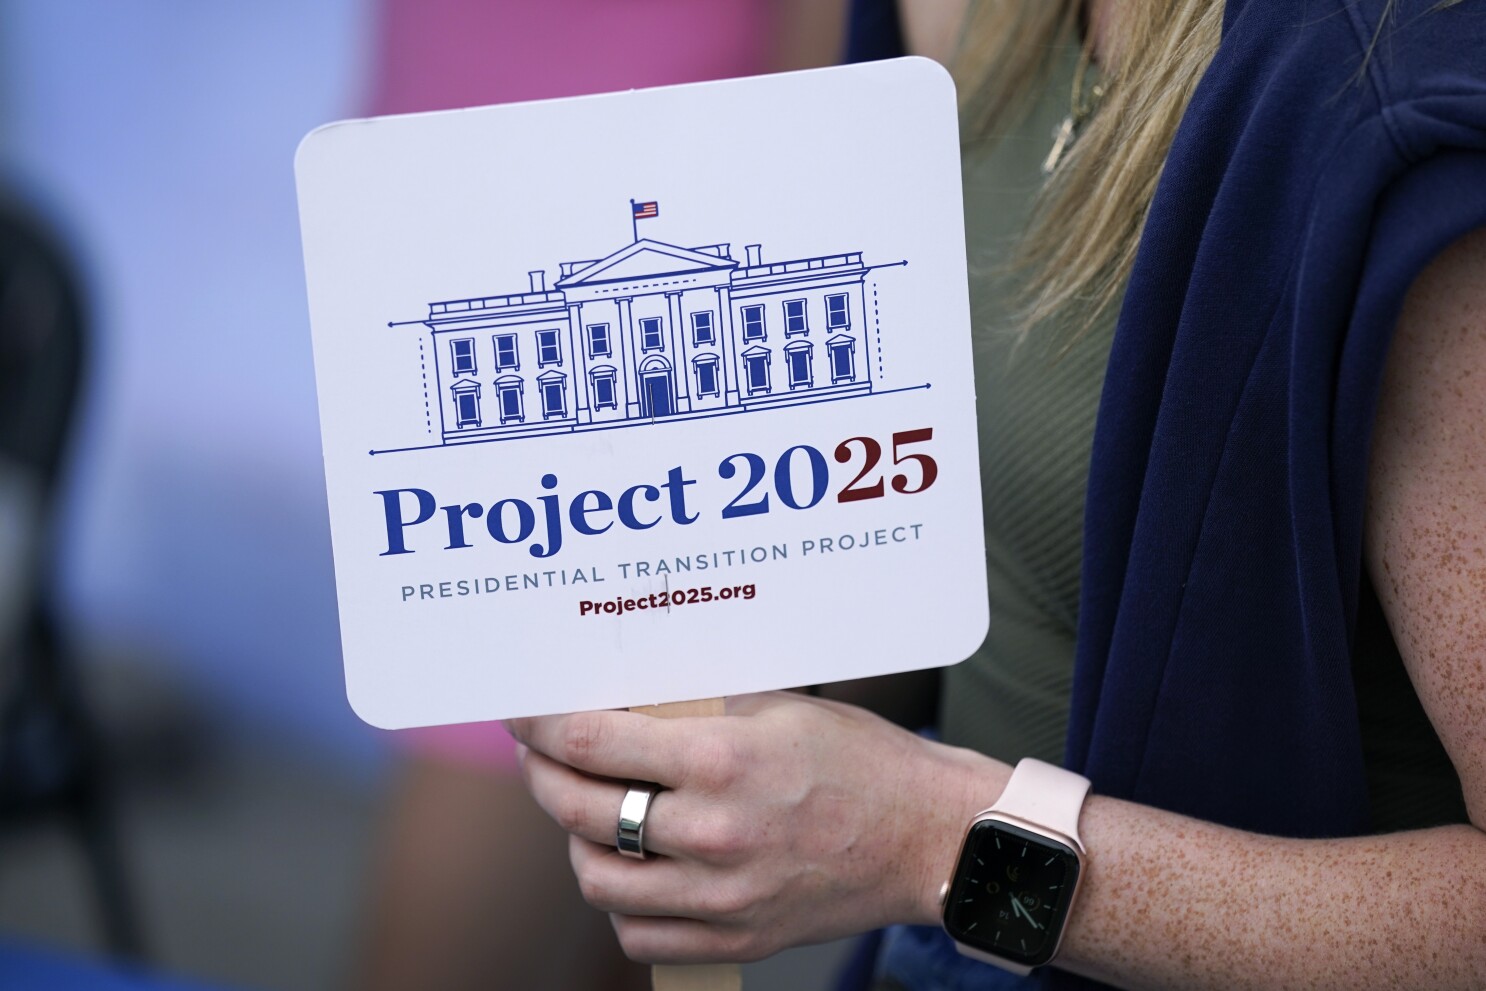 Trump's 2025 vision: A lot more power for him